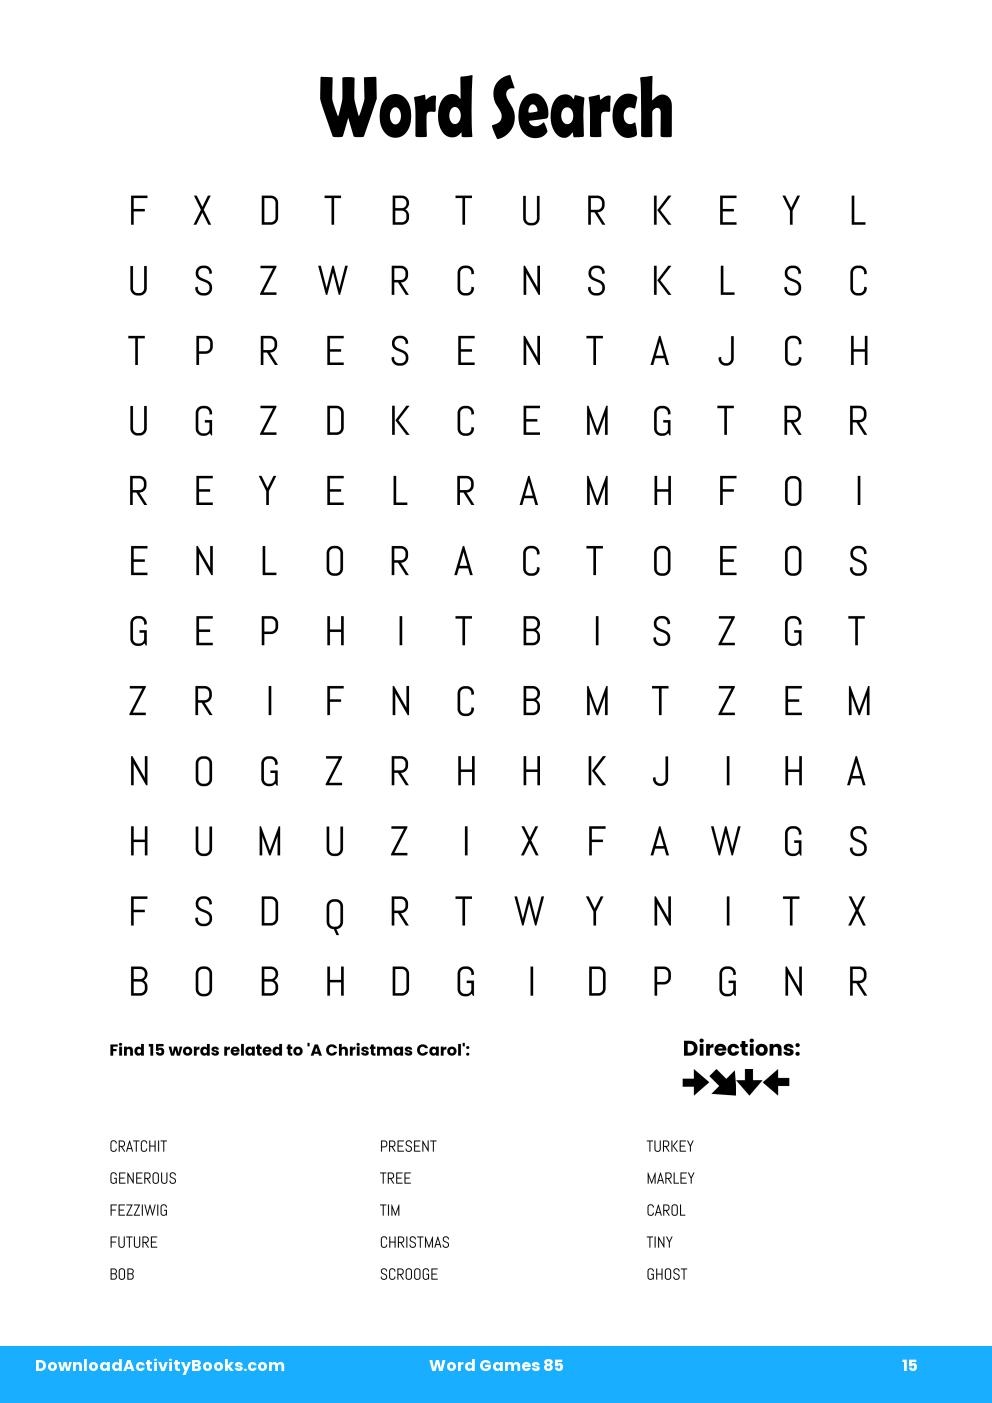 Word Search in Word Games 85